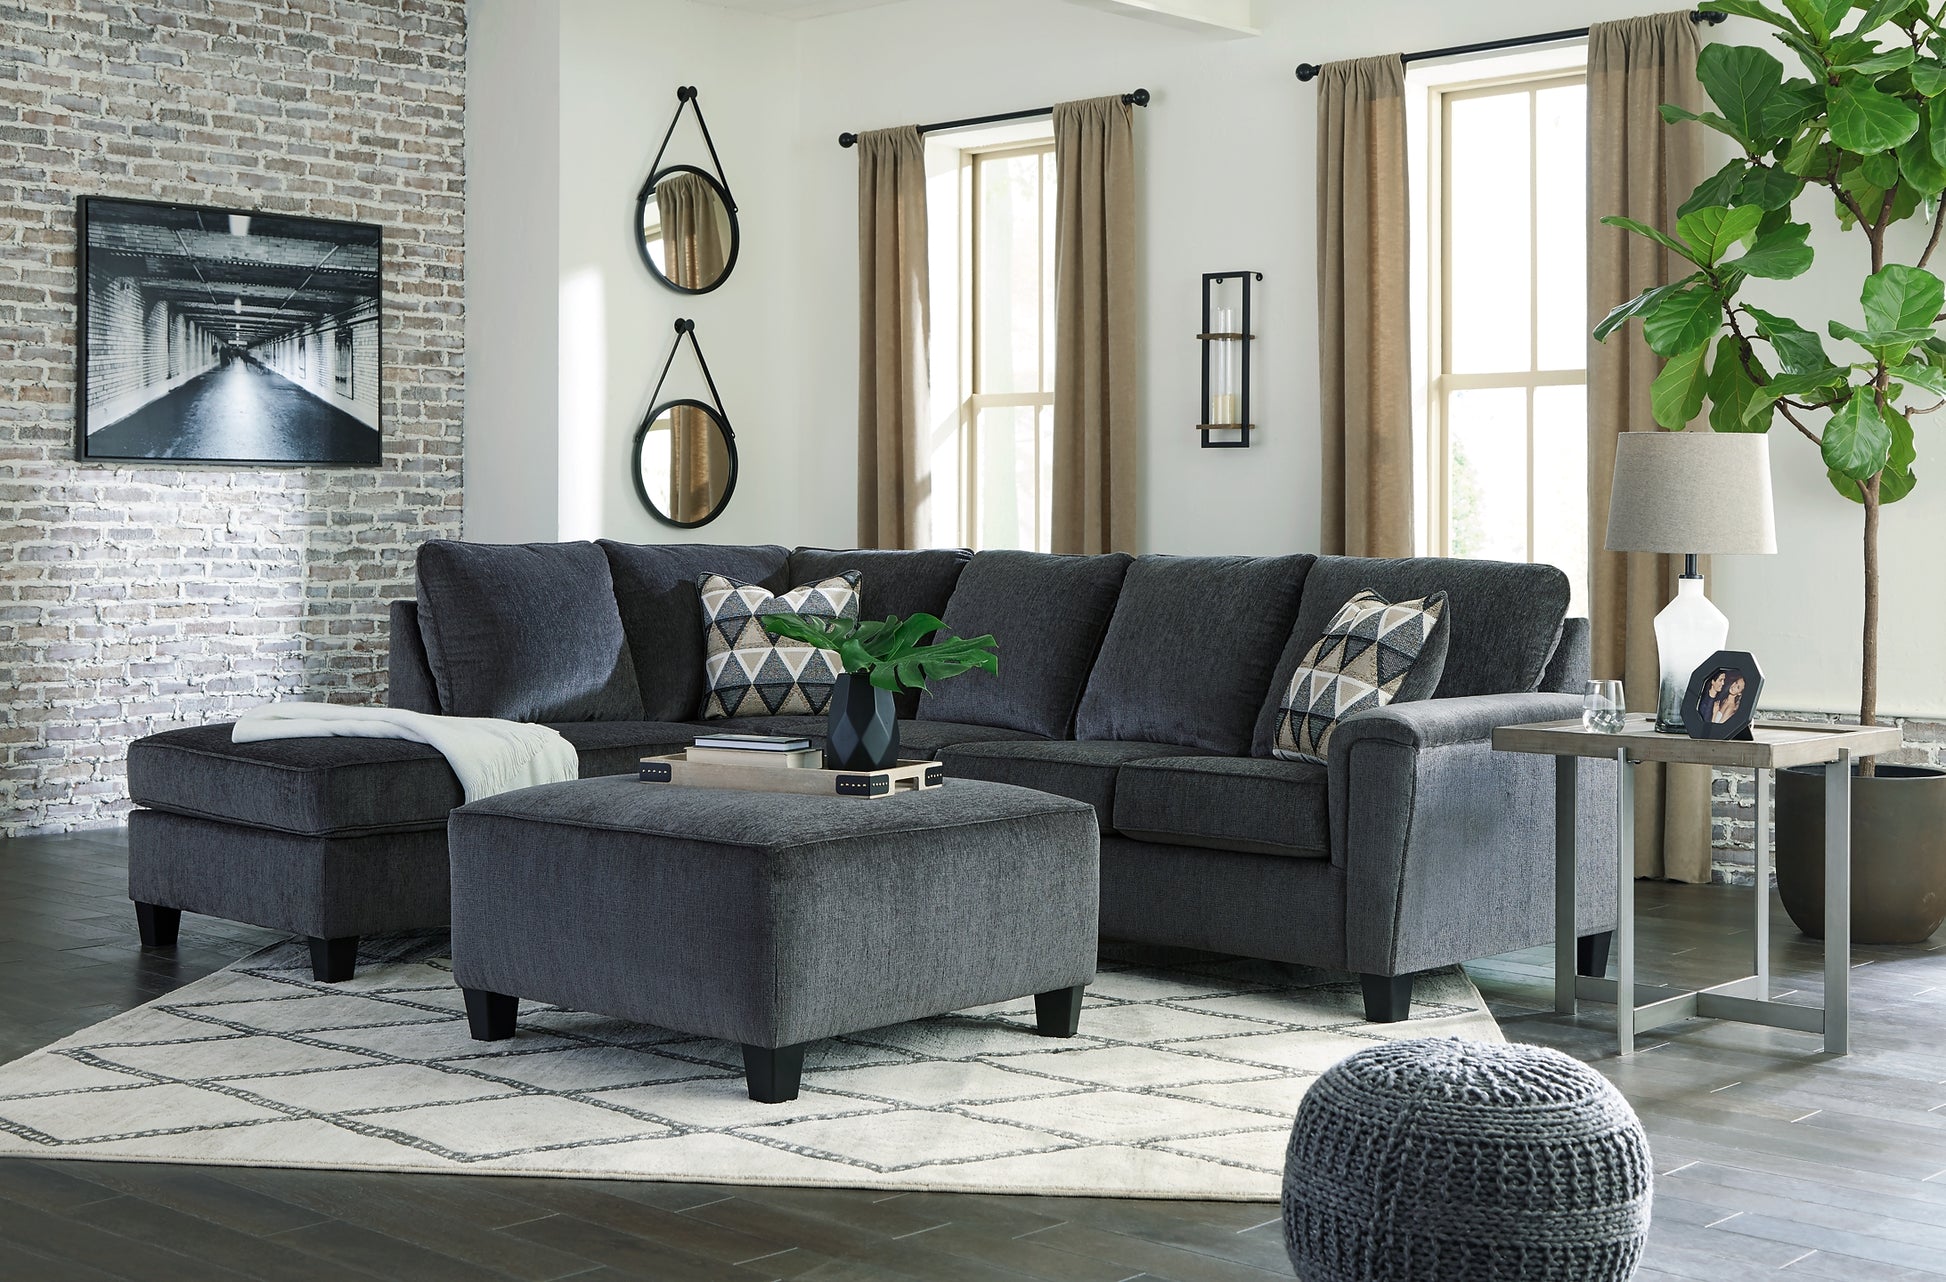 Abinger 2-Piece Sectional with Ottoman Signature Design by Ashley®